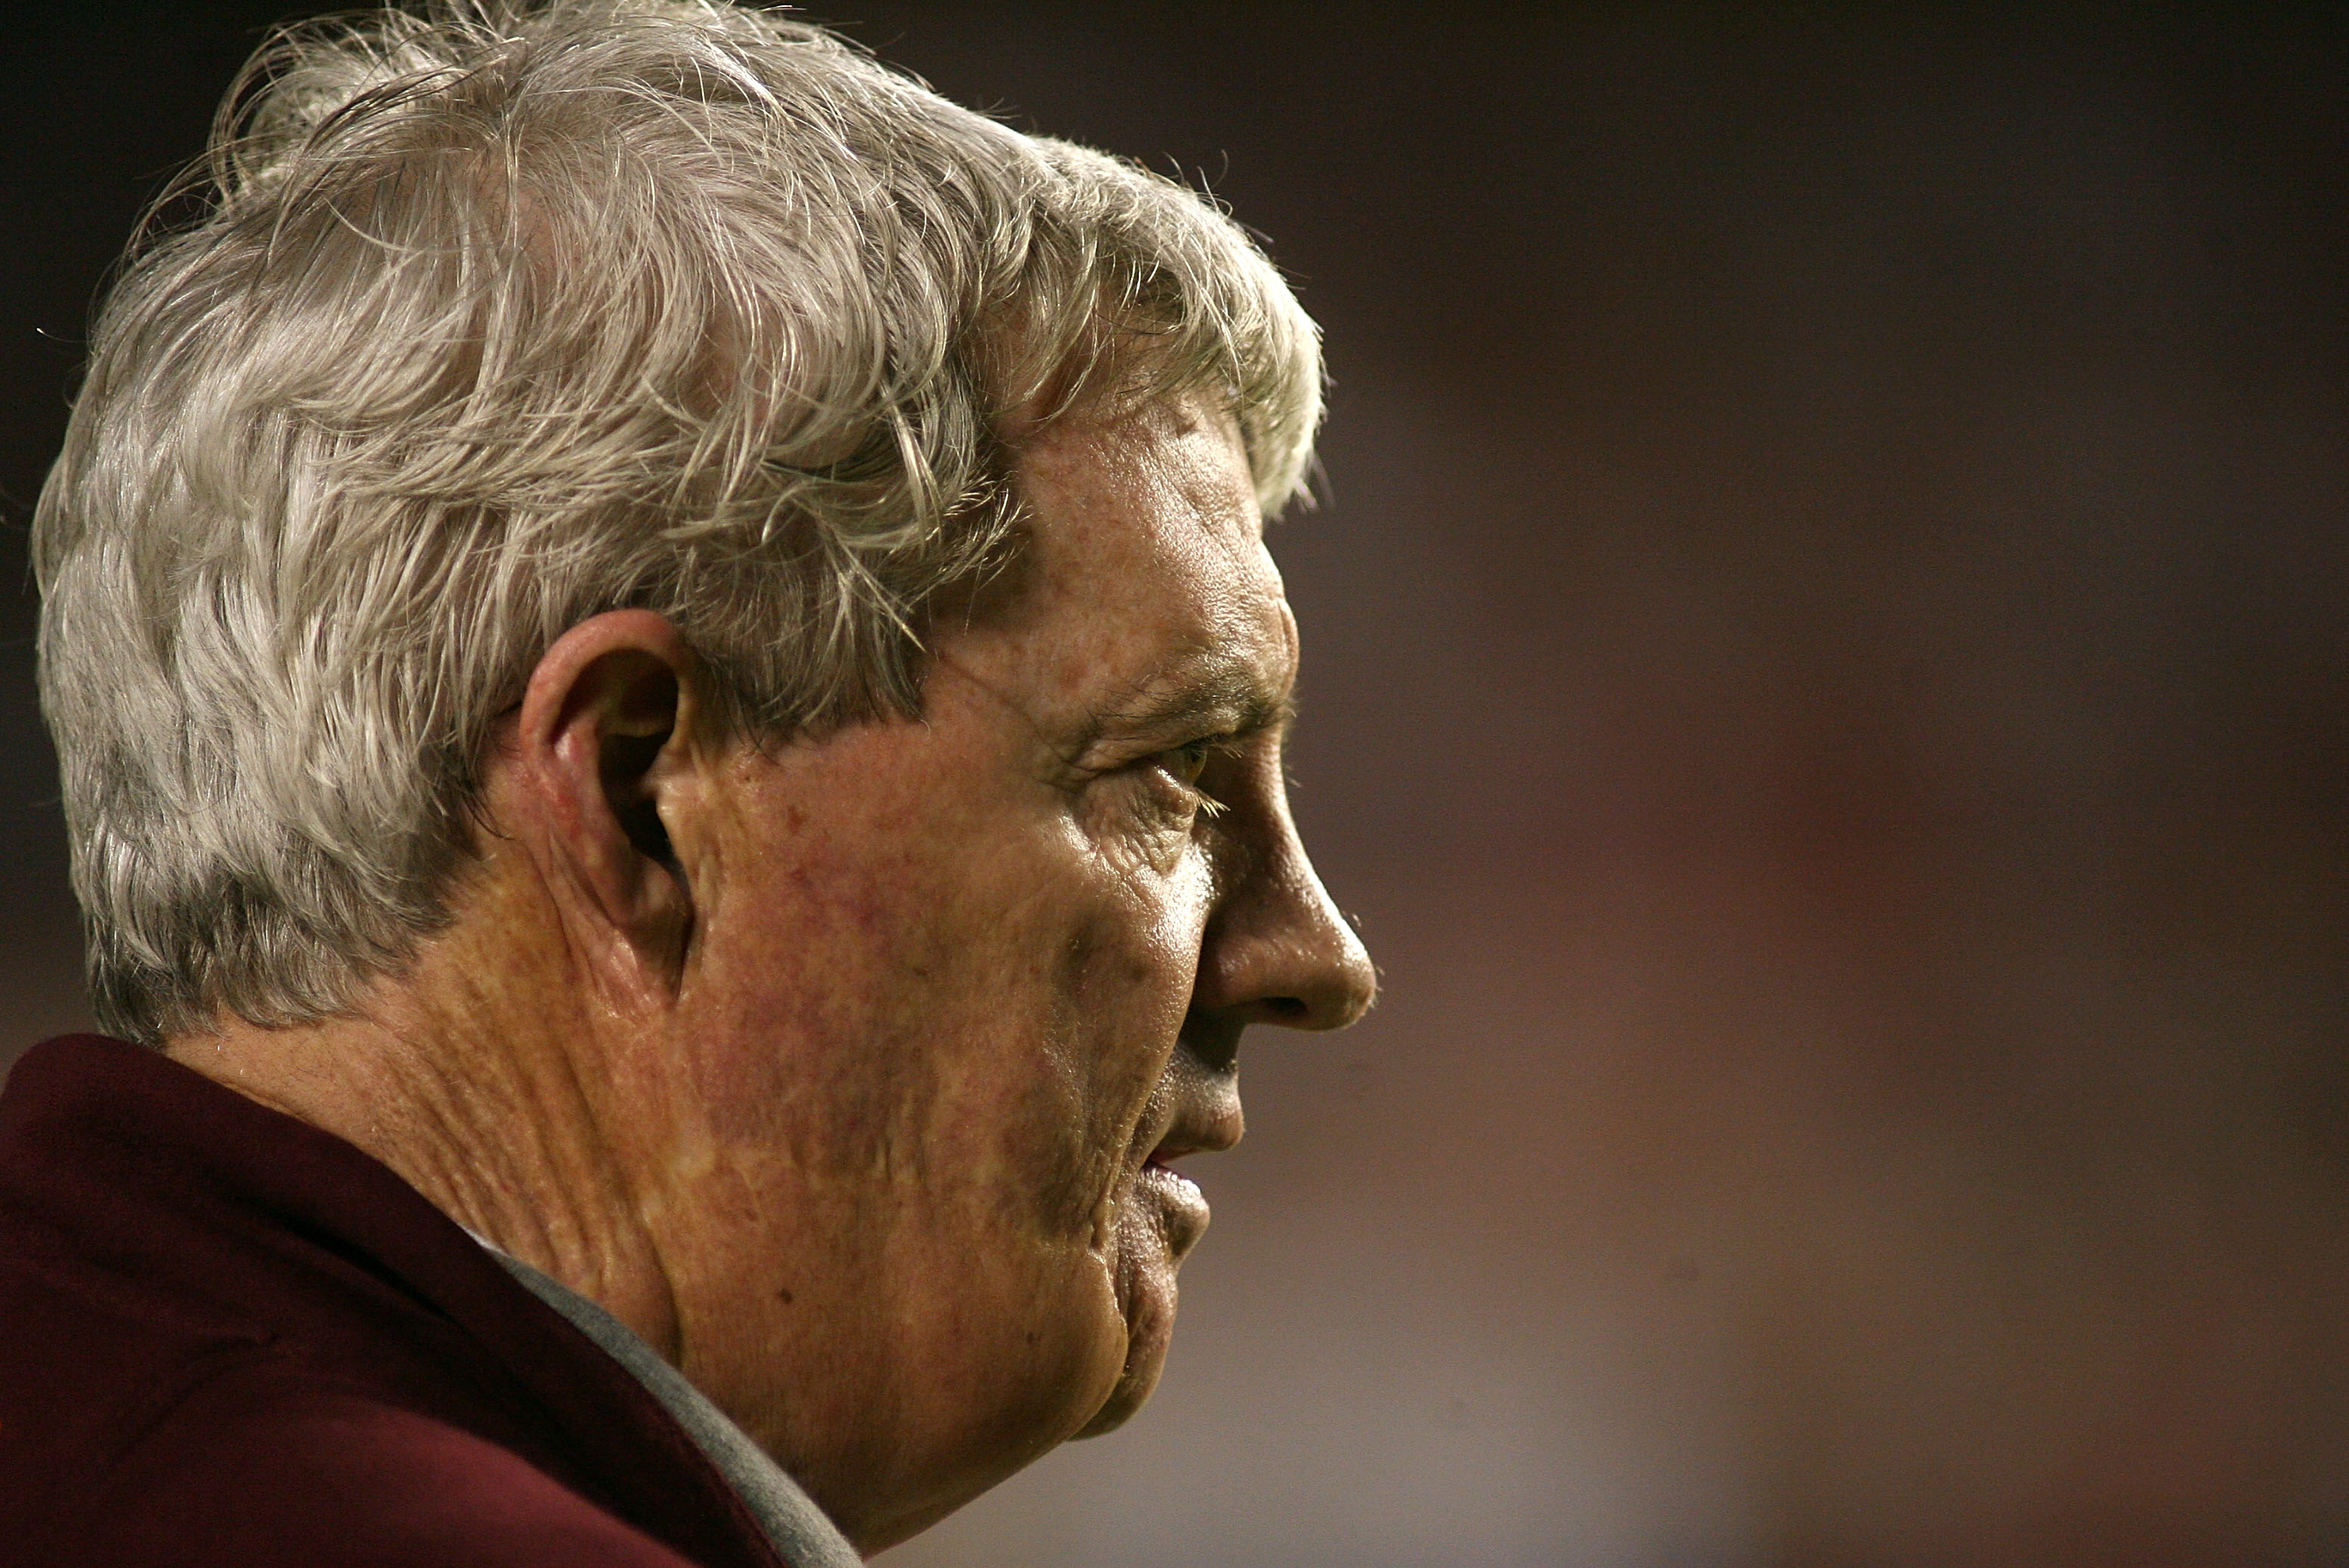 MIAMI, FL - JANUARY 03: Head coach Frank Beamer of the Virginia Tech Hokies looks on against the Stanford Cardinal during the 2011 Discover Orange Bowl at Sun Life Stadium on January 3, 2011 in Miami, Florida. Stanford won 40-12. (Photo by Marc Serota/Get